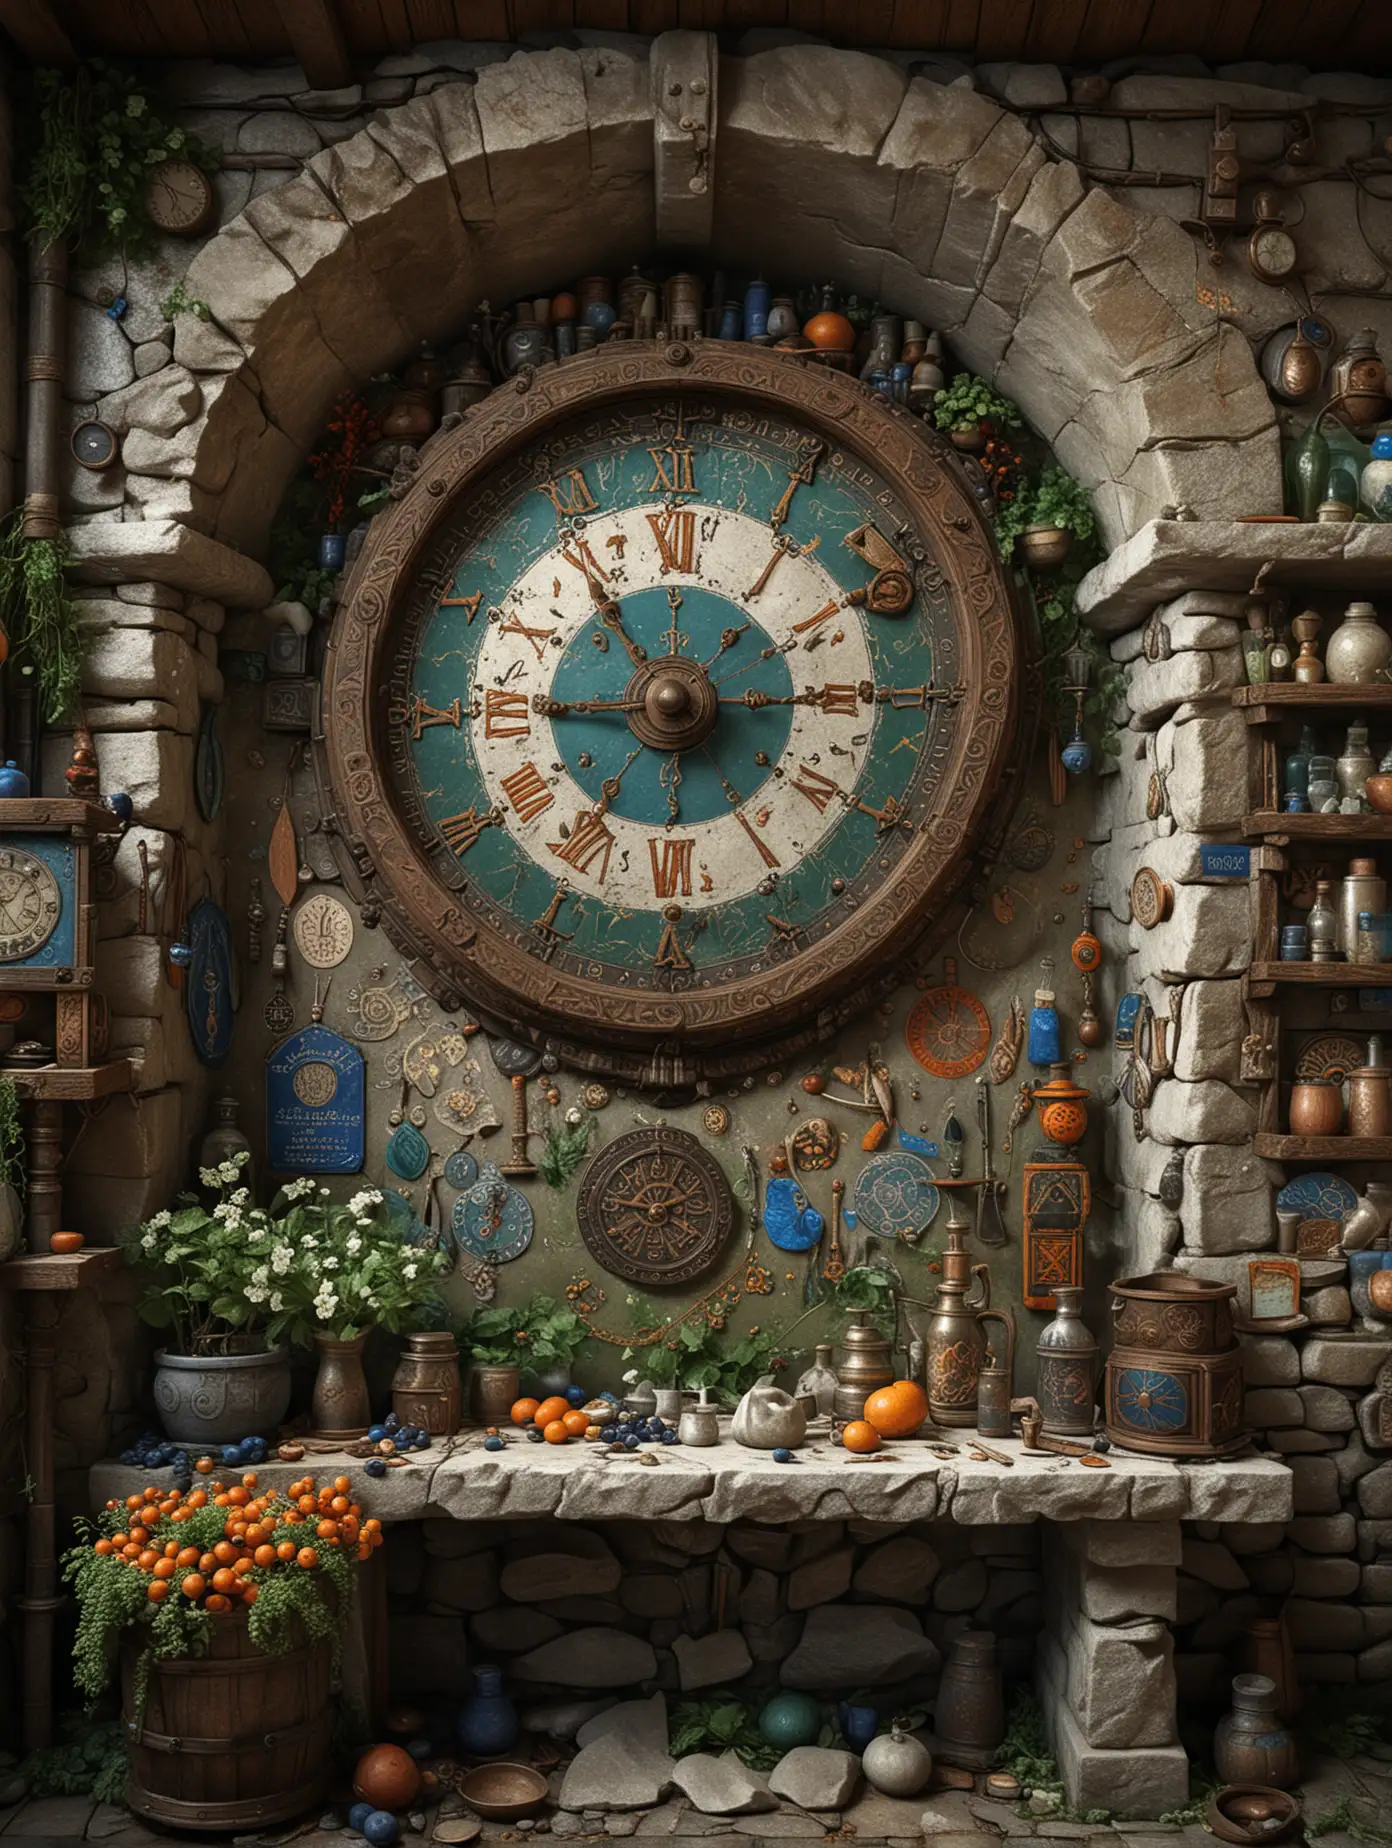 A vast indoor neat white stone ancient alchemical laboratory in viking style : 1.n| colorful green and orange painting on the walls : .9n| blue magical signs on the wall : 1.n| very detailed large clock in bronze : 1.n| a detailed female viking shaman with long hair and a long adorned tunic with signs : 1.n| flowers and berries : .5n| clear,dark nordic atmosphere : 1.n| highly detailed,high precision,focus on textures, hyperrealistic,bright,no blur : 1.